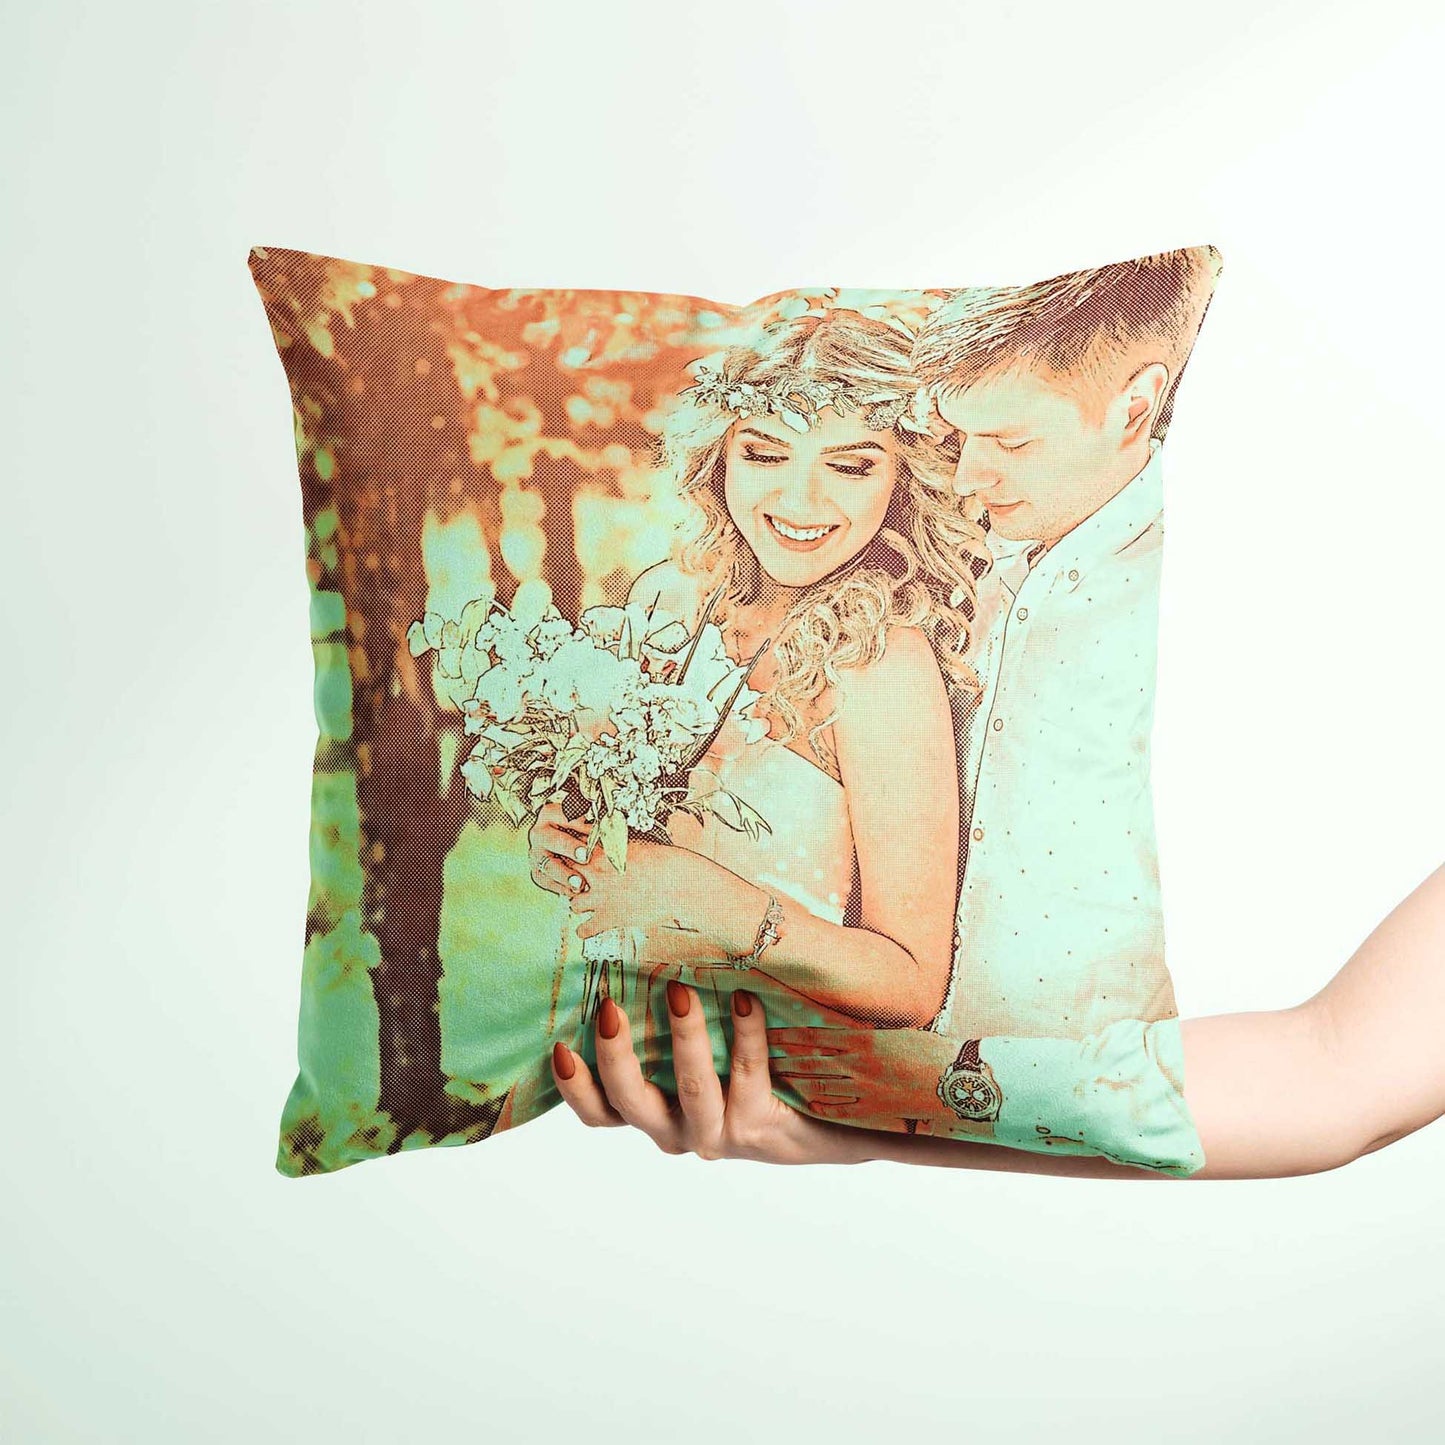 Add a contemporary flair to your home with the Personalised Orange and Green Cushion. This custom-designed cushion features a vibrant digital art print, inspired by your chosen photo, creating a fresh and trendy ambiance, handmade